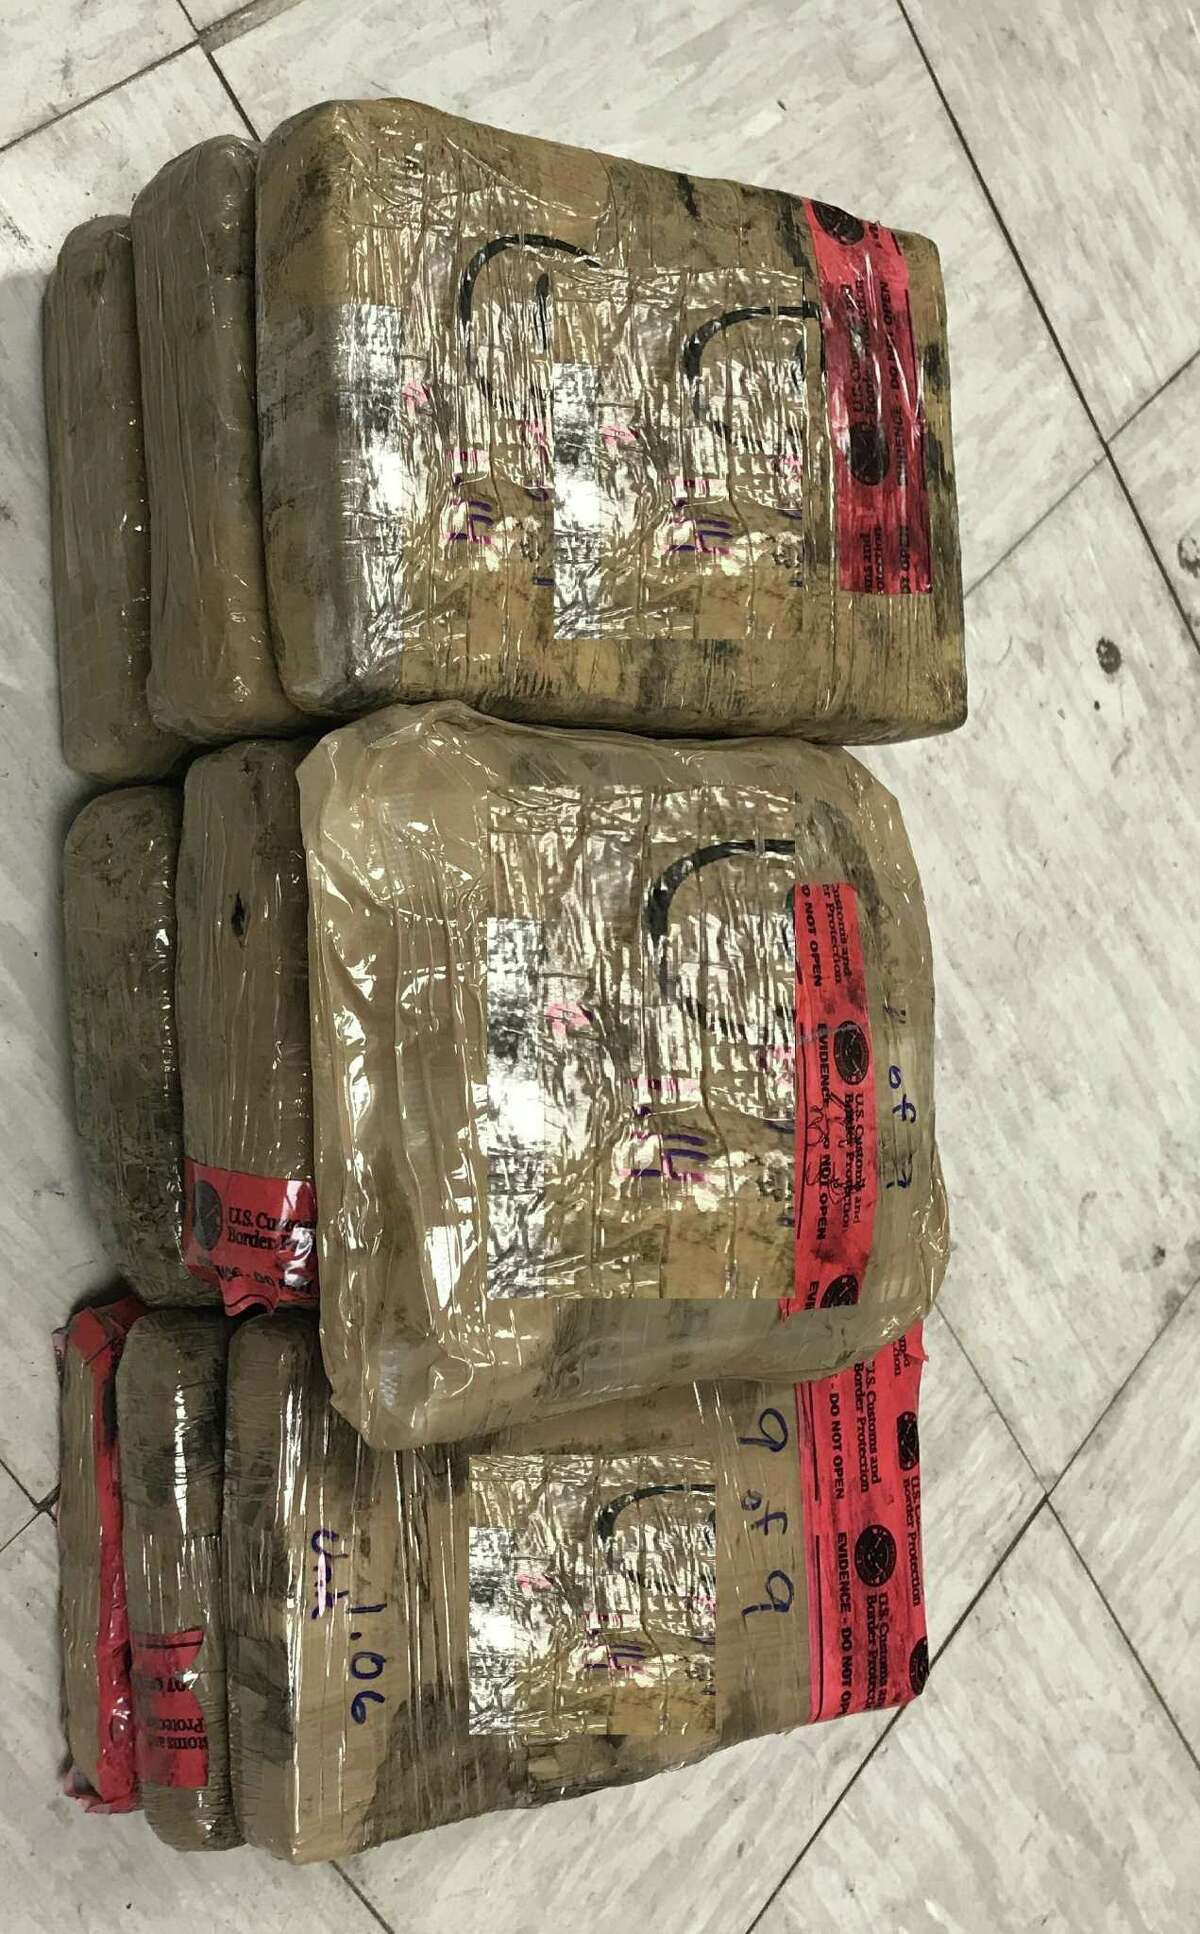 During the month of May, CBP conducted three drug seizures. The drugs combined resulted in an estimated street value of $298,704.